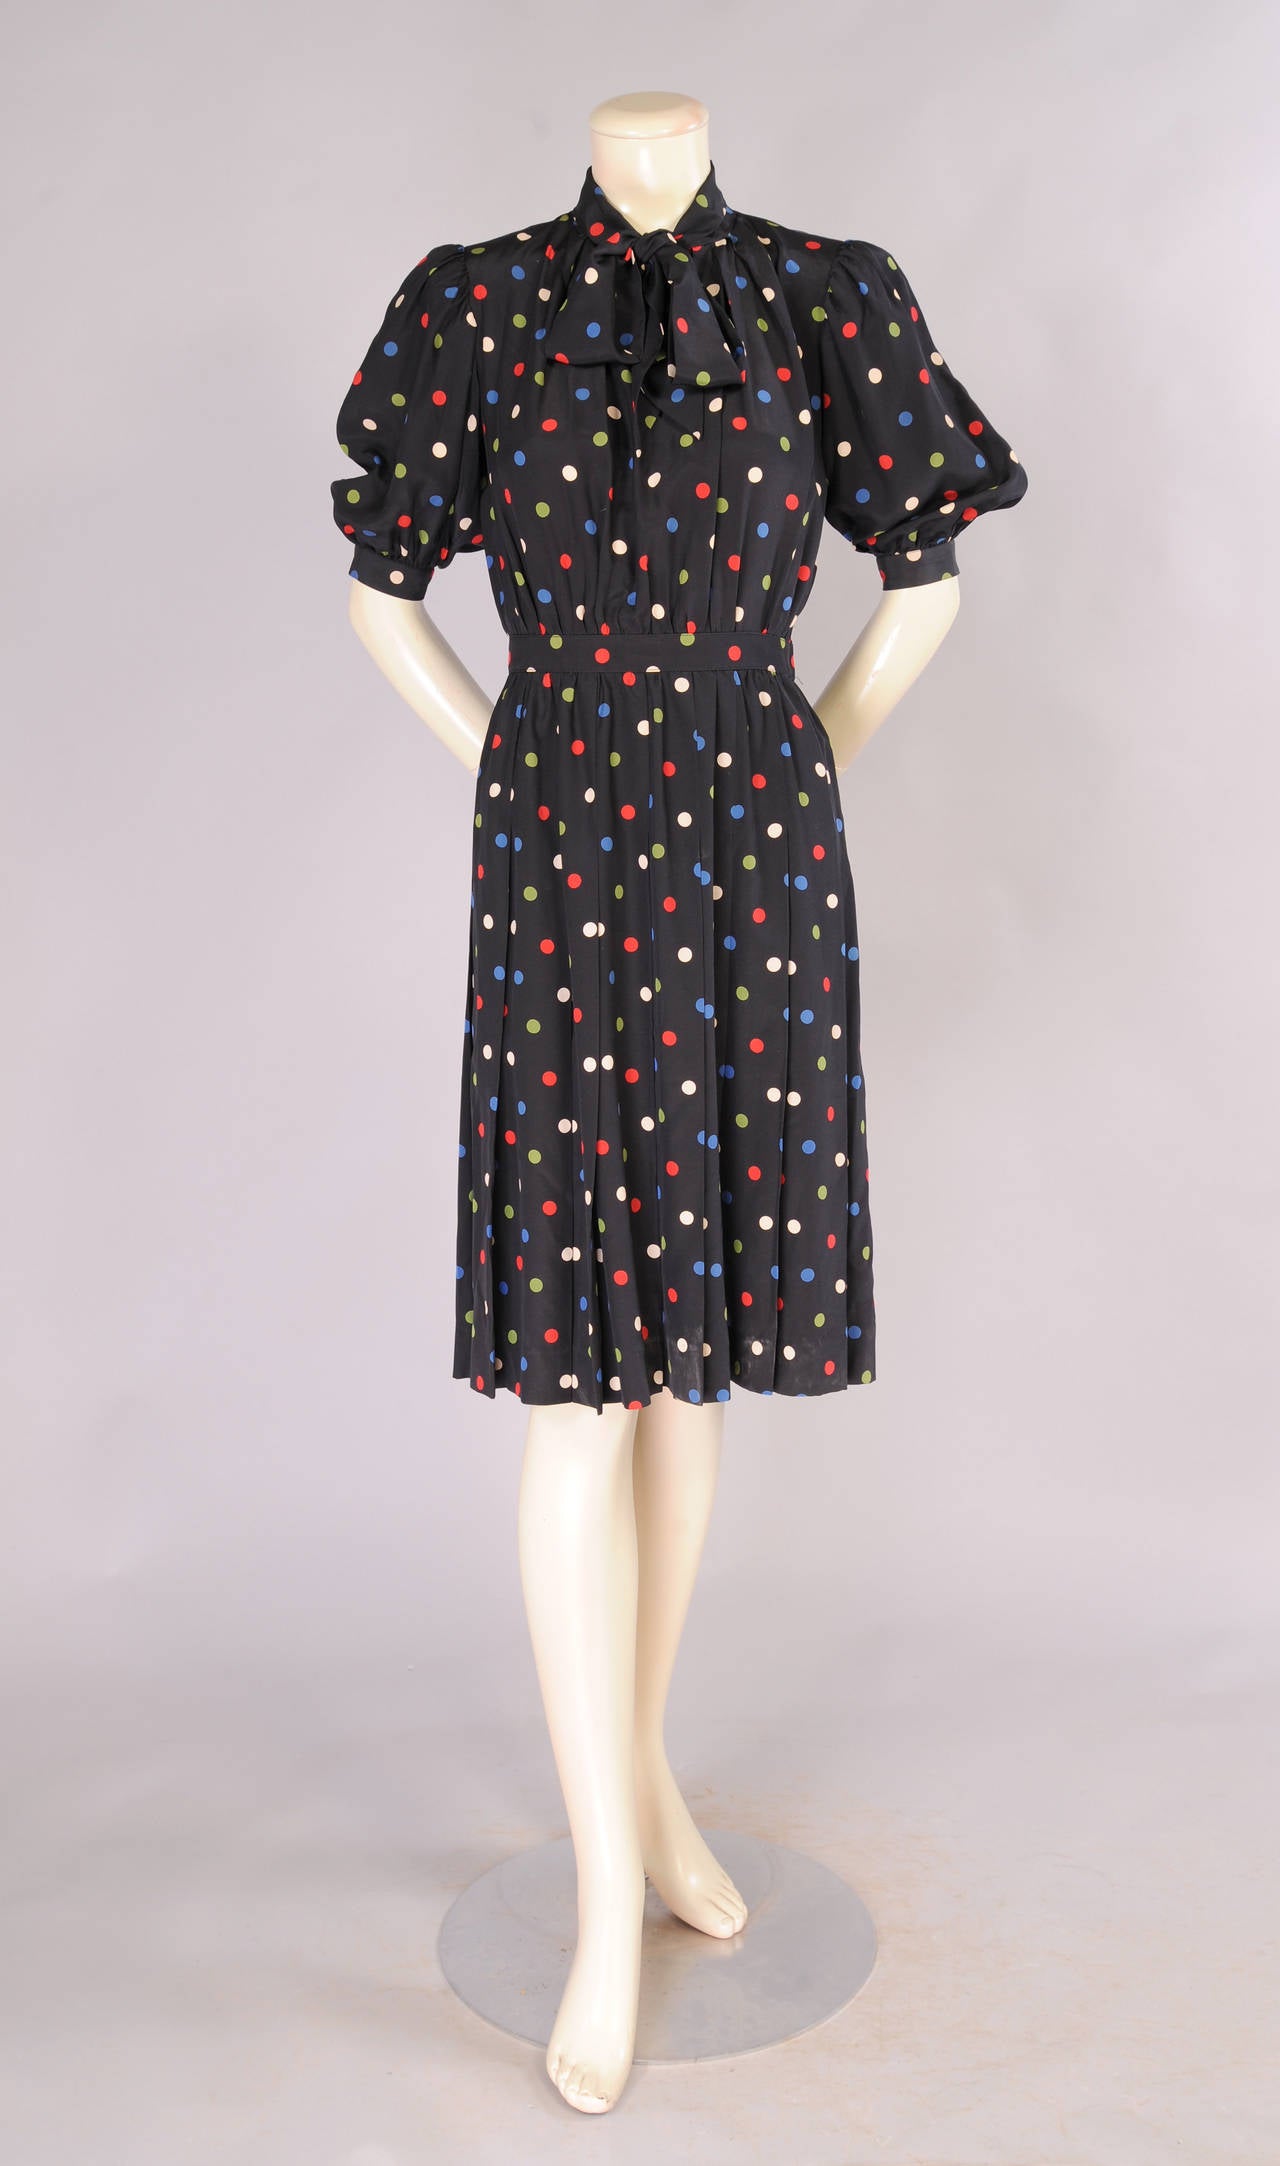 This 1940's inspired black silk dress has a pussy cat bow at the neckline, a fitted waist, stitched down pleats and a left side zipper. It is in excellent condition and marked a vintage size 36.
Measurements;
Shoulders 14